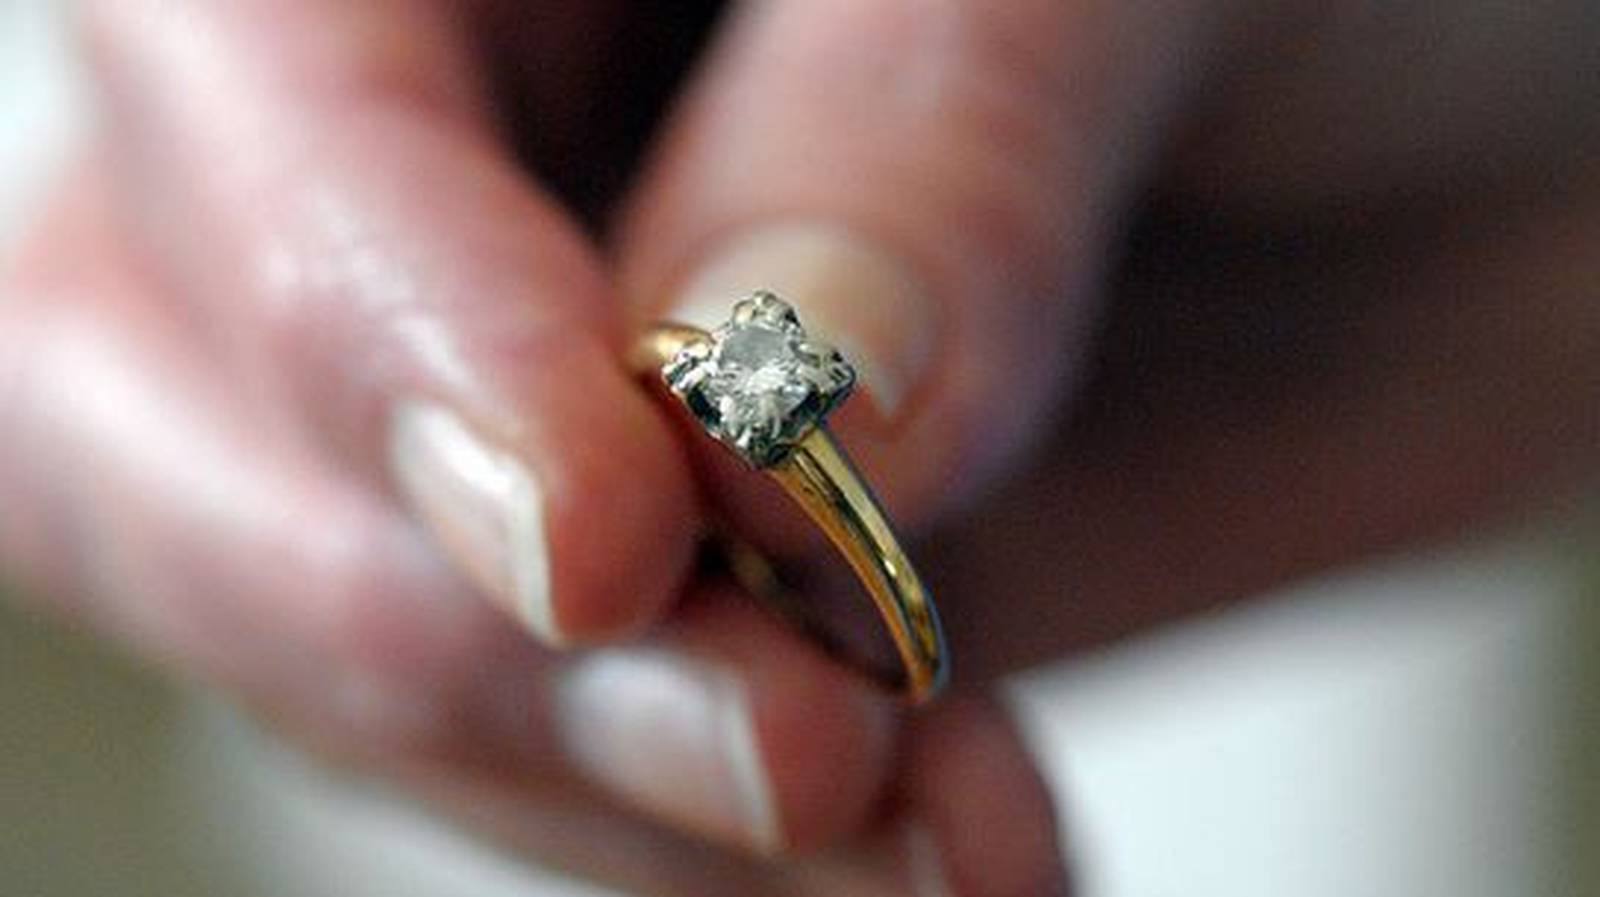 Cabinet Approval Sought To Make Forced Marriage A Crime The Irish Times 